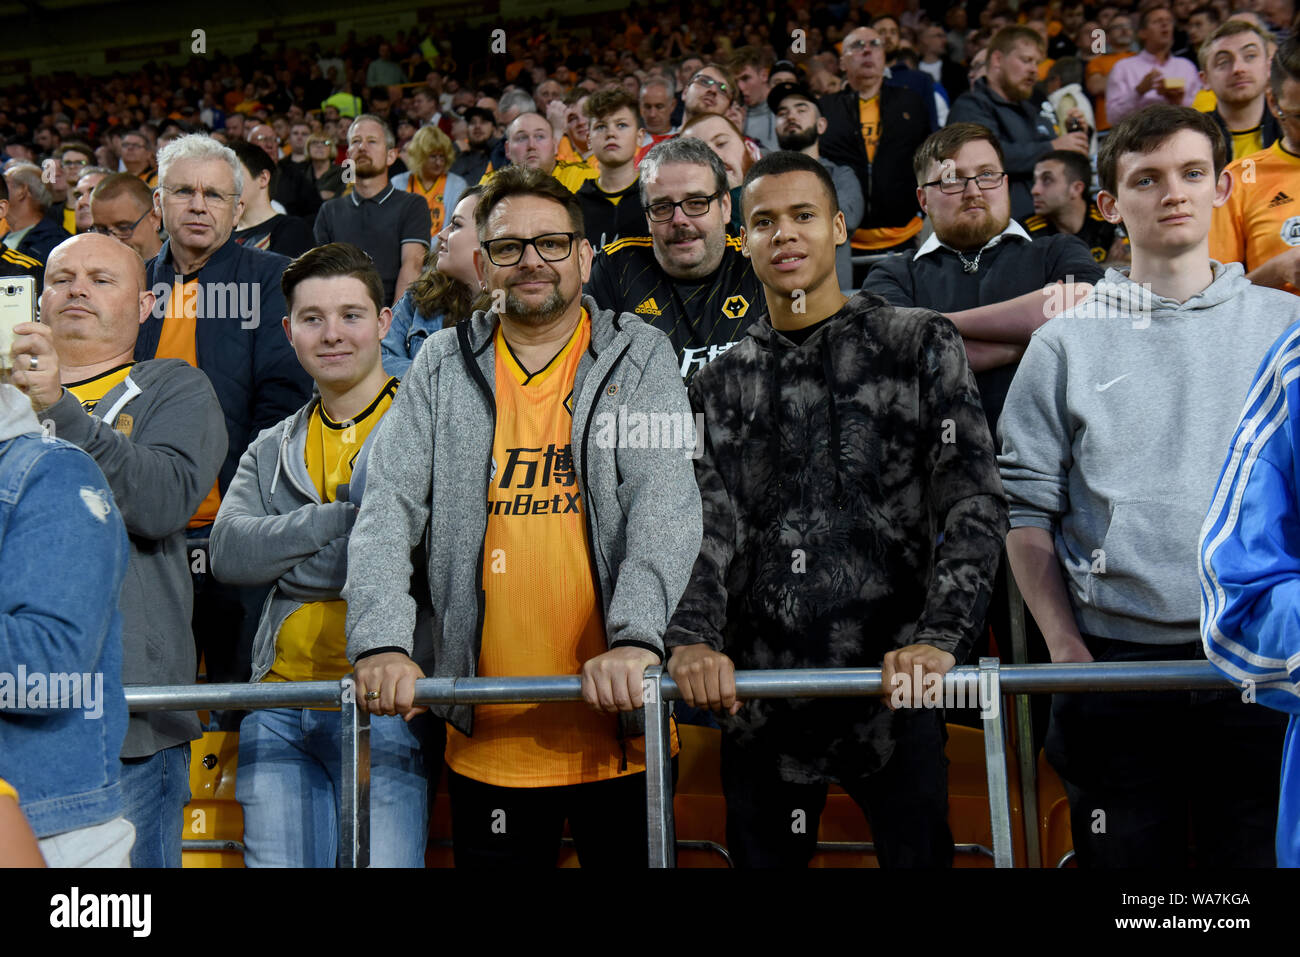 Football supporters using safe standing seats at Molineux Football Stadium home of Wolverhampton Wanderers FC. Stock Photo